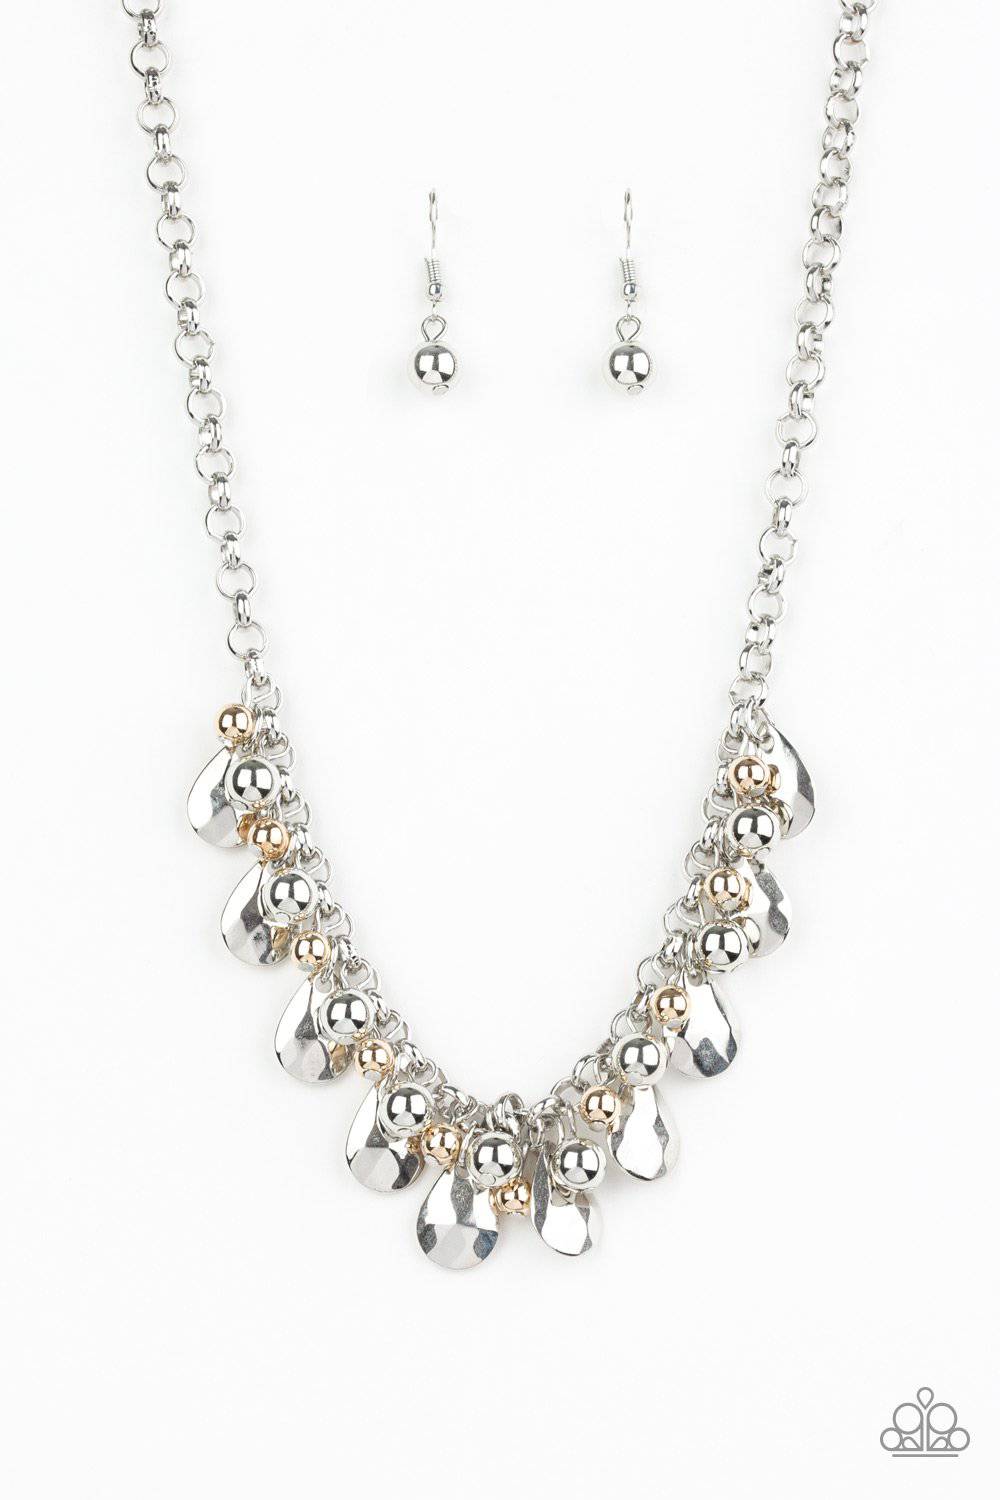 Stage Stunner - Silver & Gold Bead Necklace - Paparazzi Accessories - GlaMarous Titi Jewels